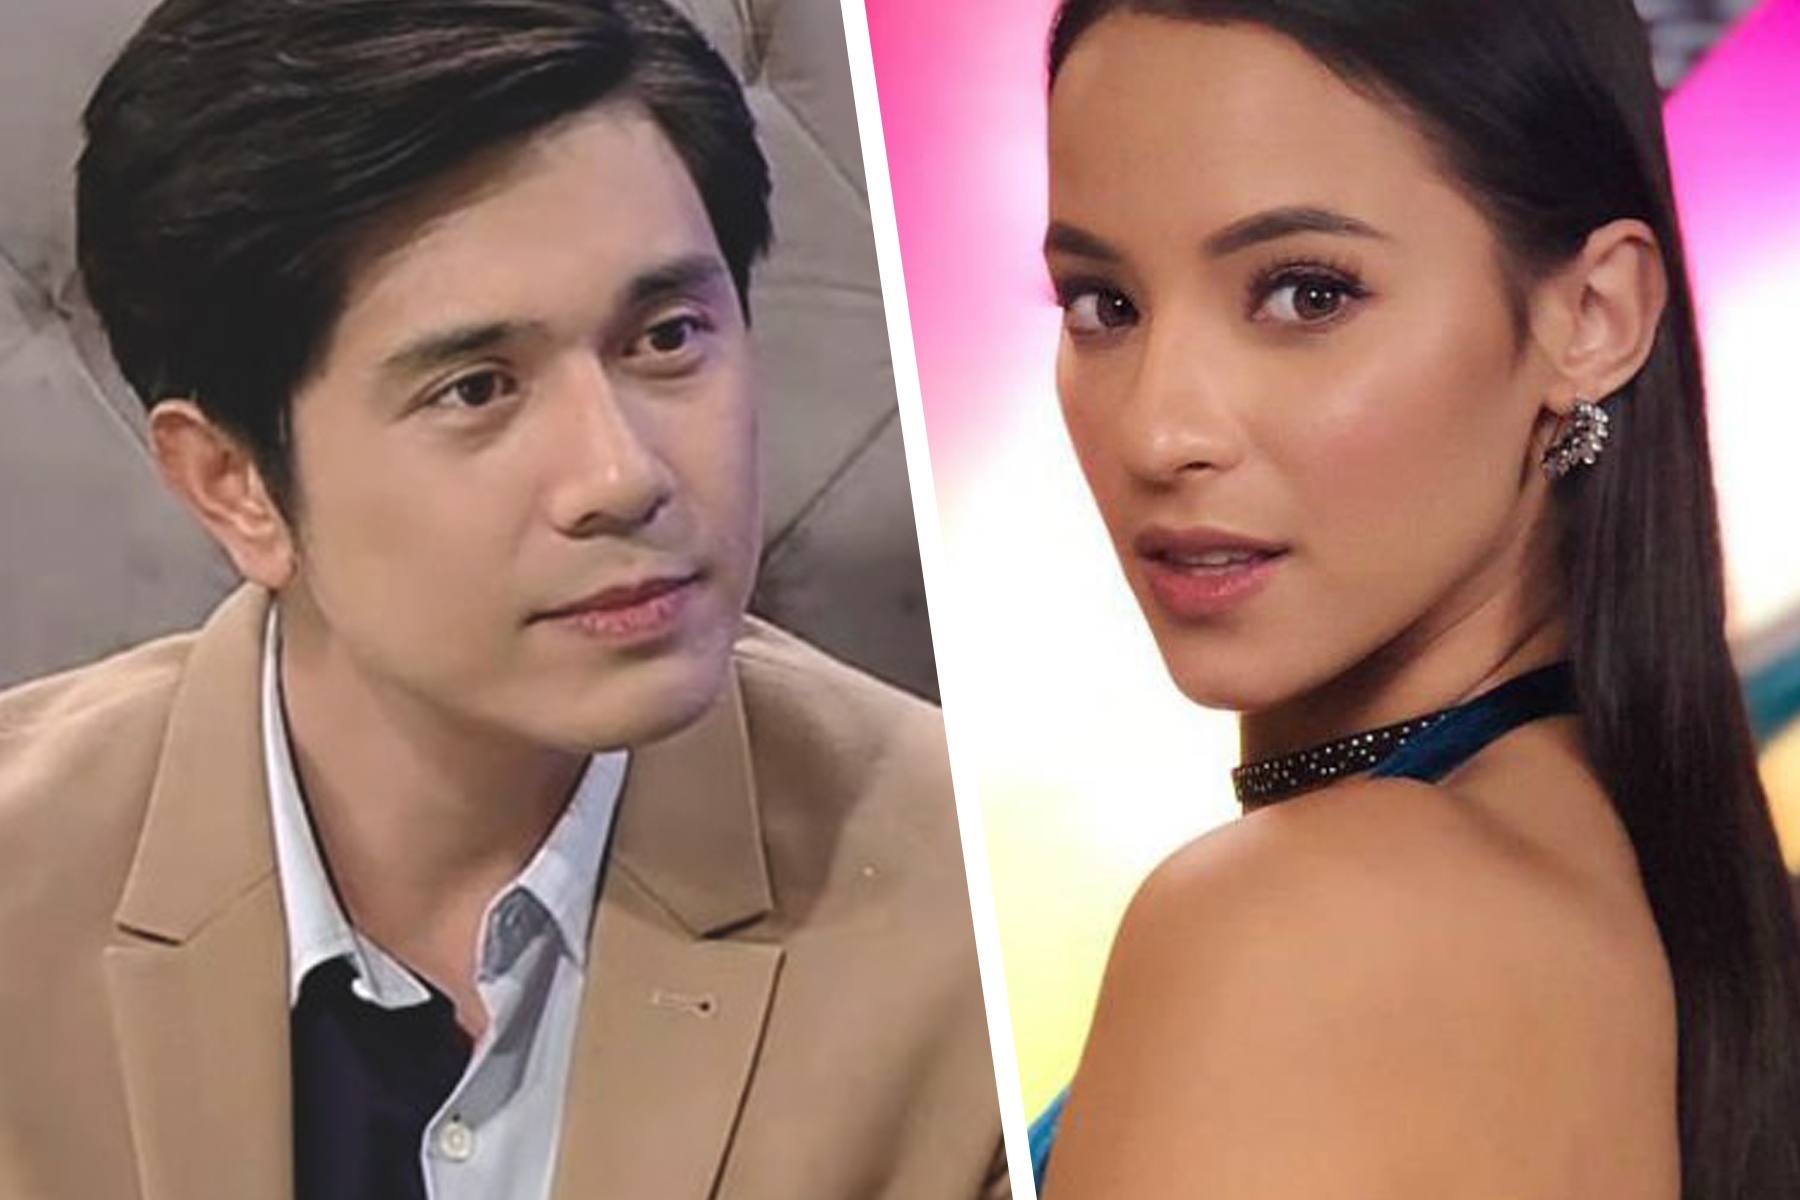 Paulo Avelino spotted with girlfriend at 'Goyo' premiere